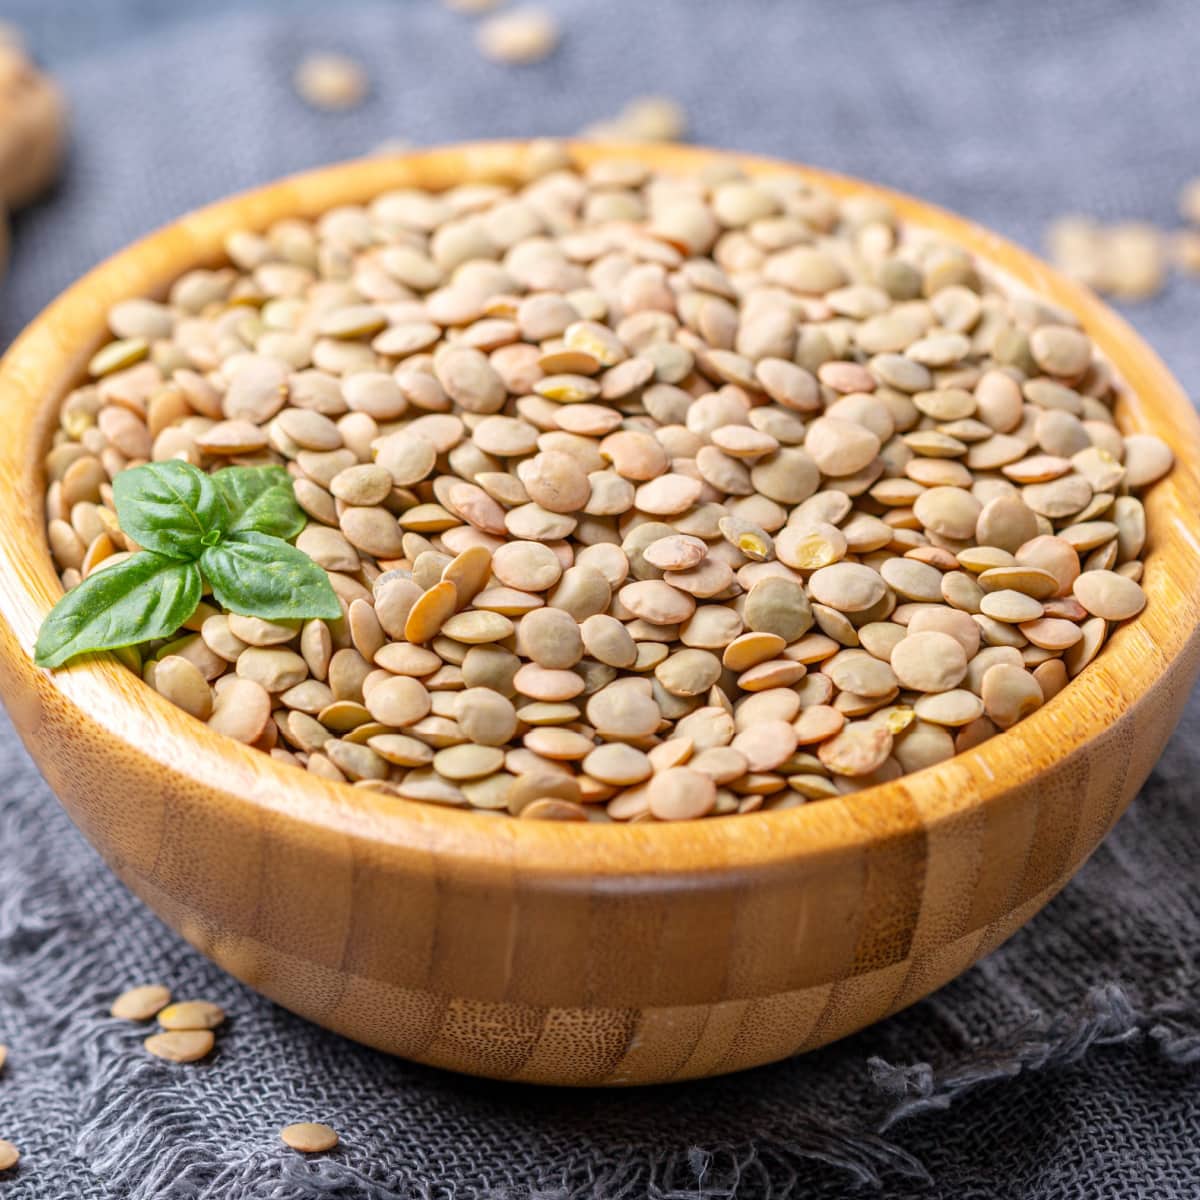 Lentils in a Wooden Bowl